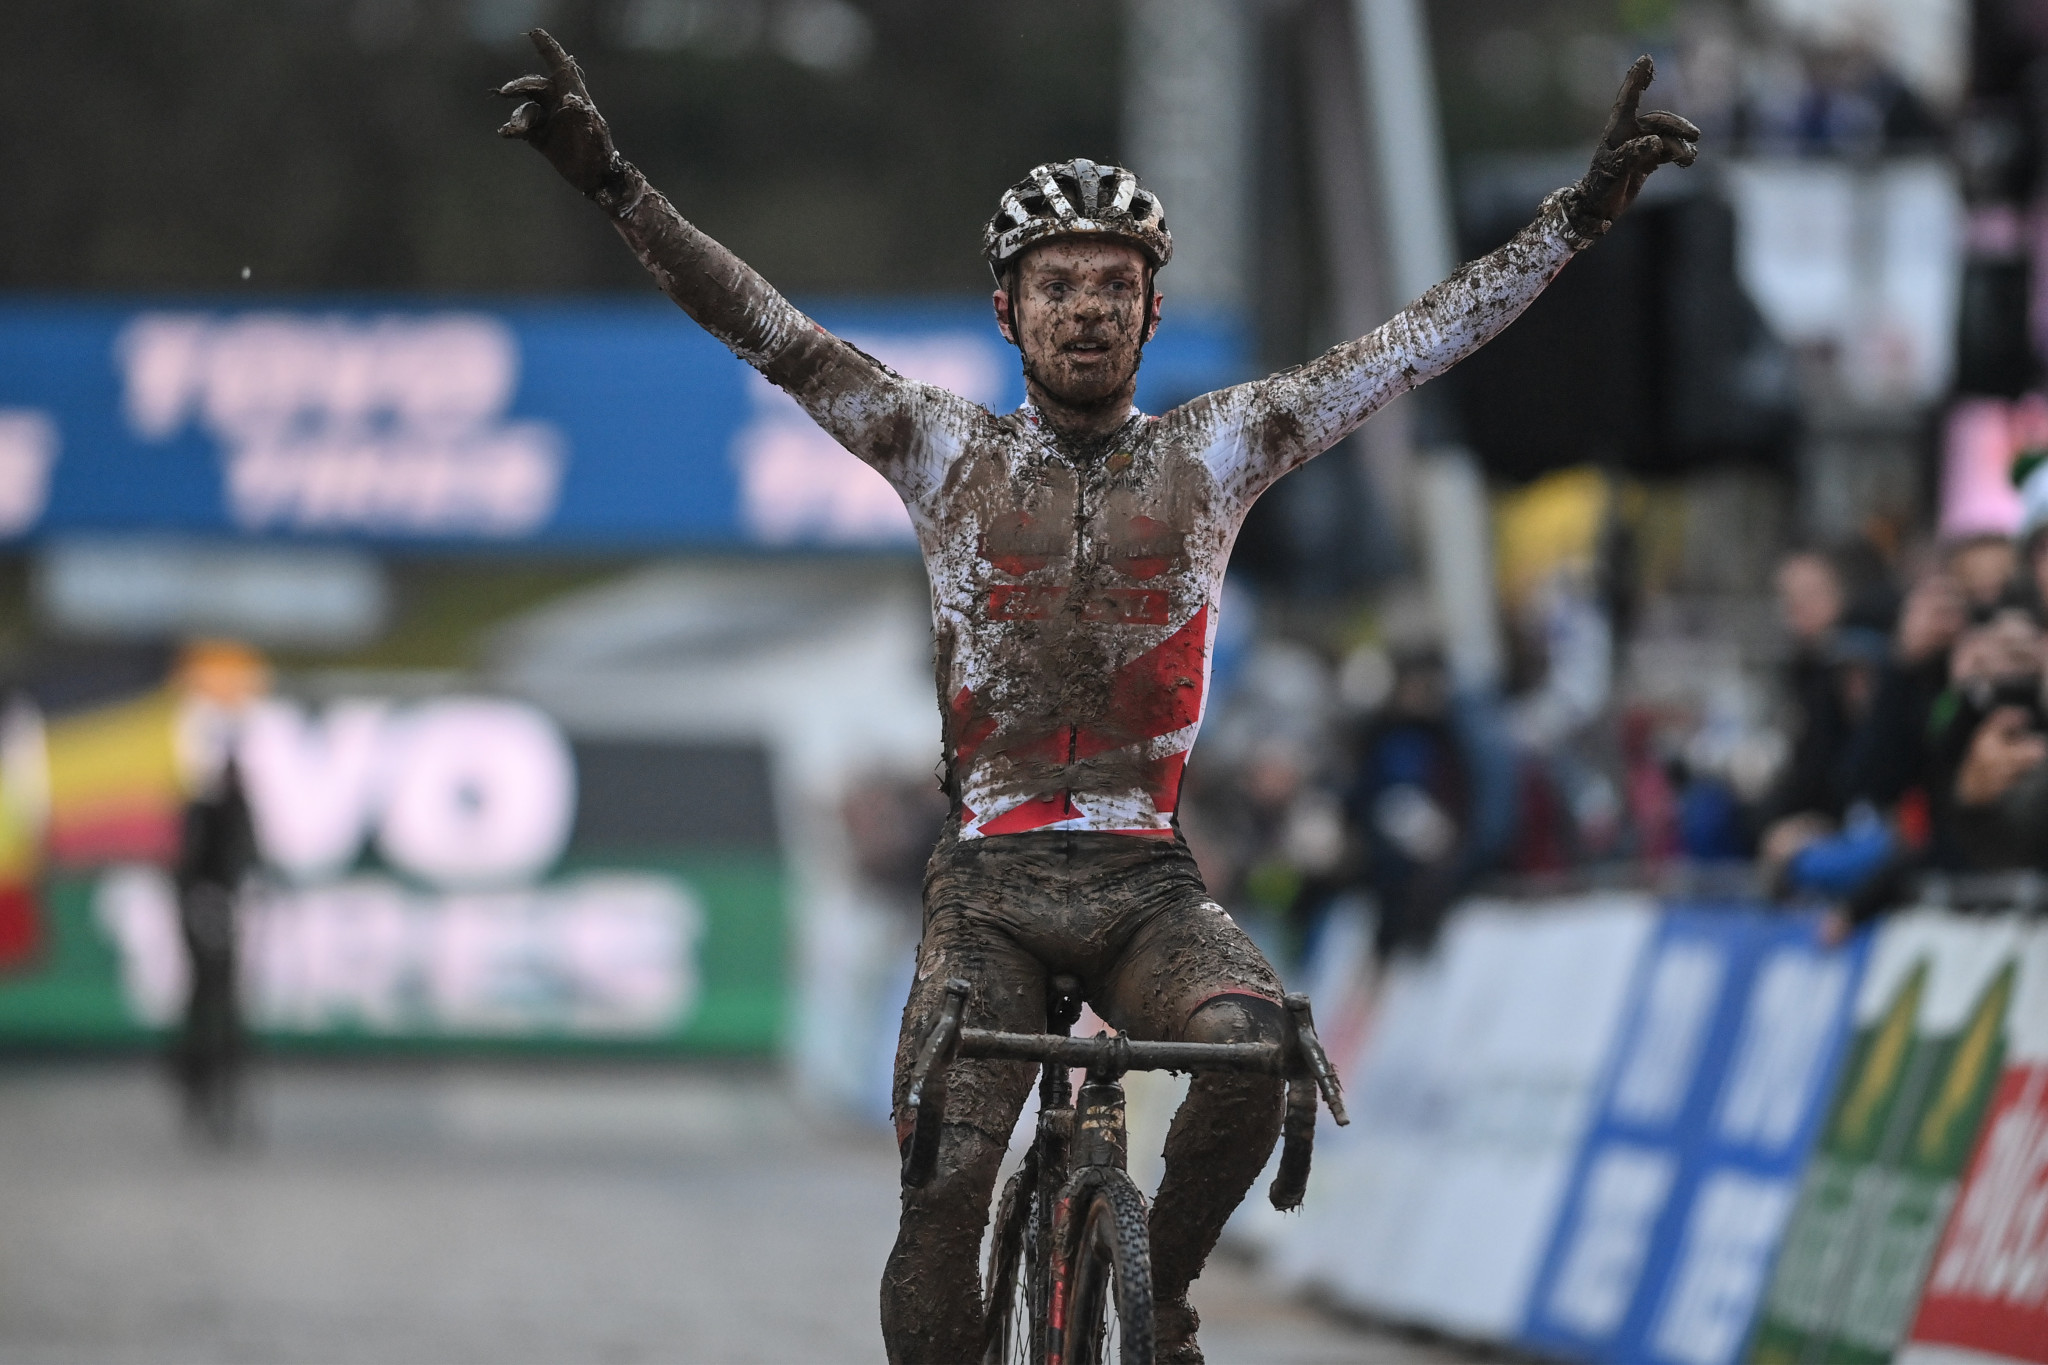 Iserbyt and Brand extend overall Cyclo-cross World Cup leads with Besançon wins